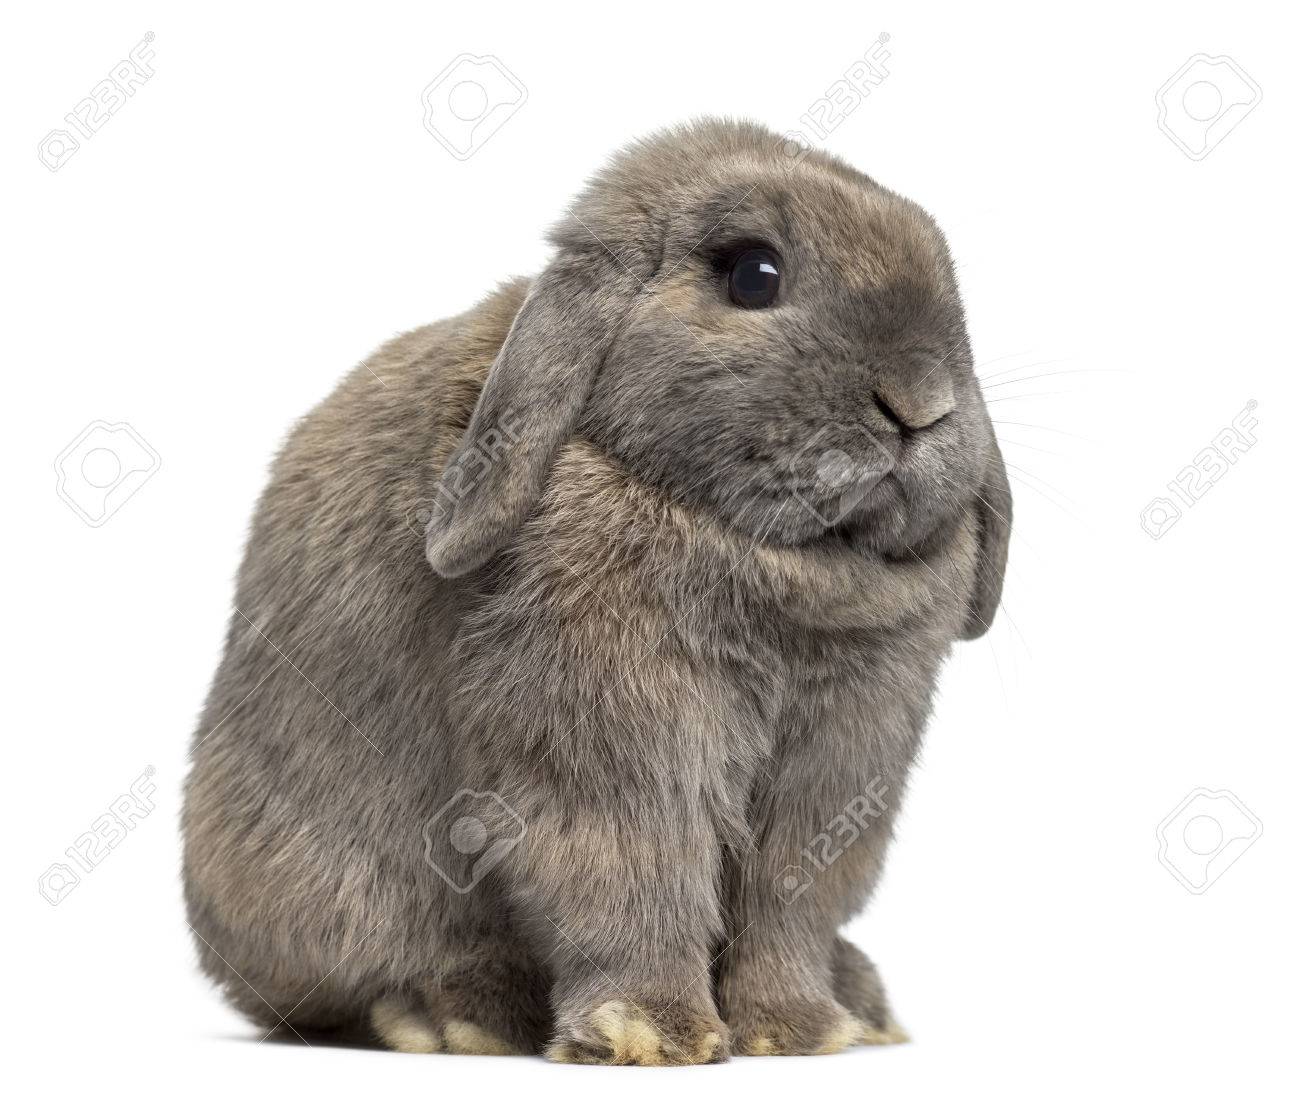 64970803-side-view-of-a-cute-holland-lop-rabbit-isolated-on-white